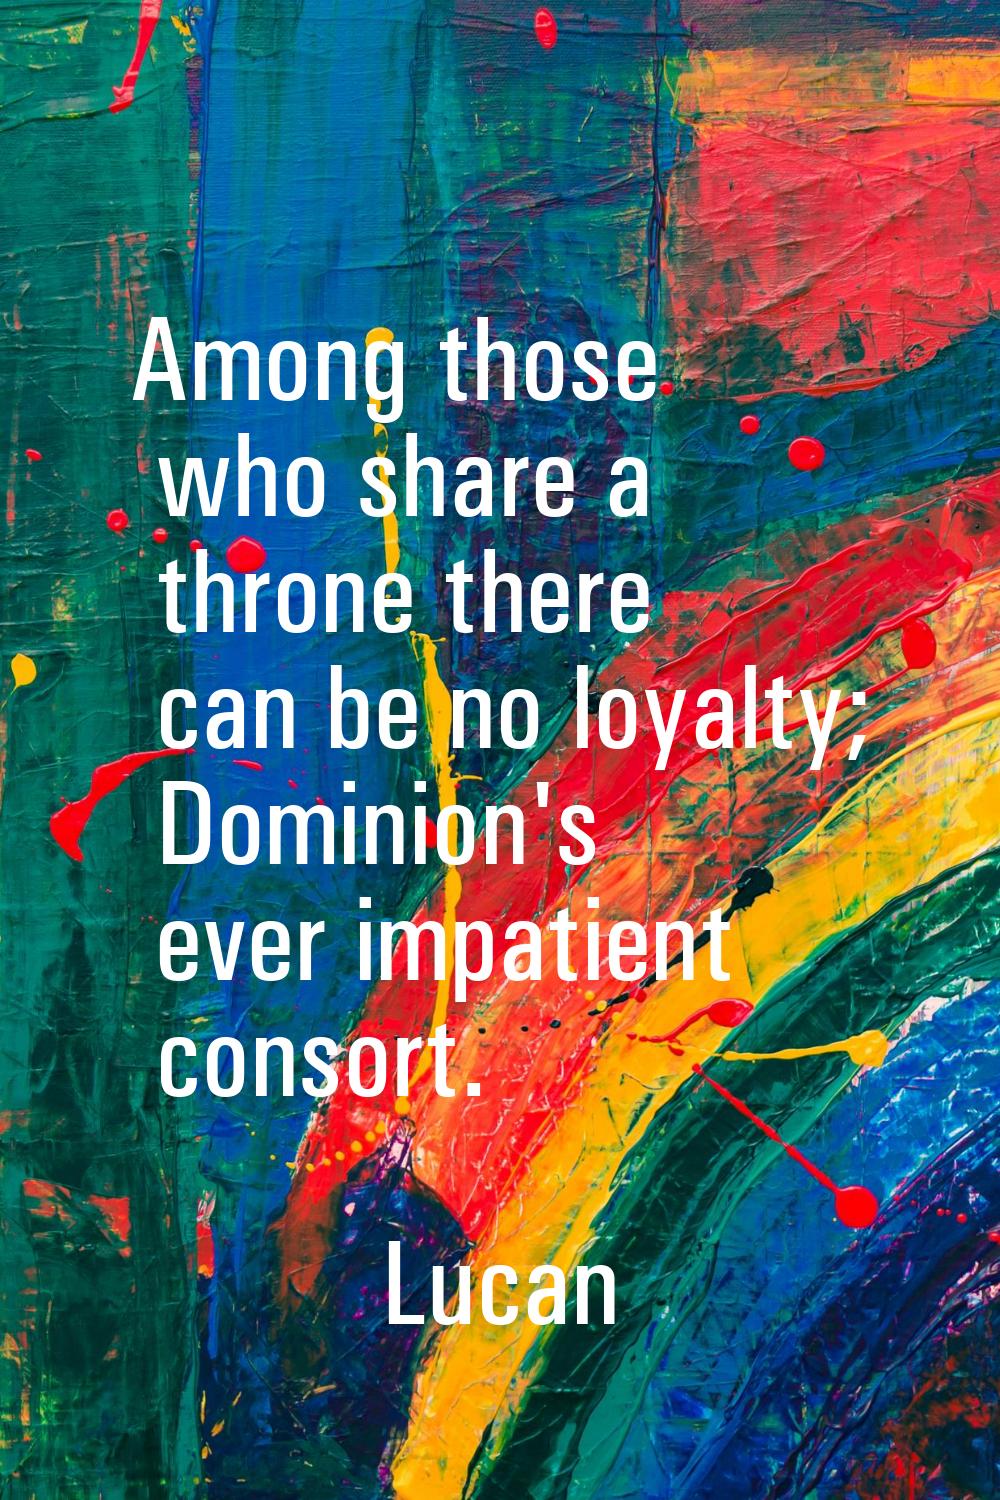 Among those who share a throne there can be no loyalty; Dominion's ever impatient consort.